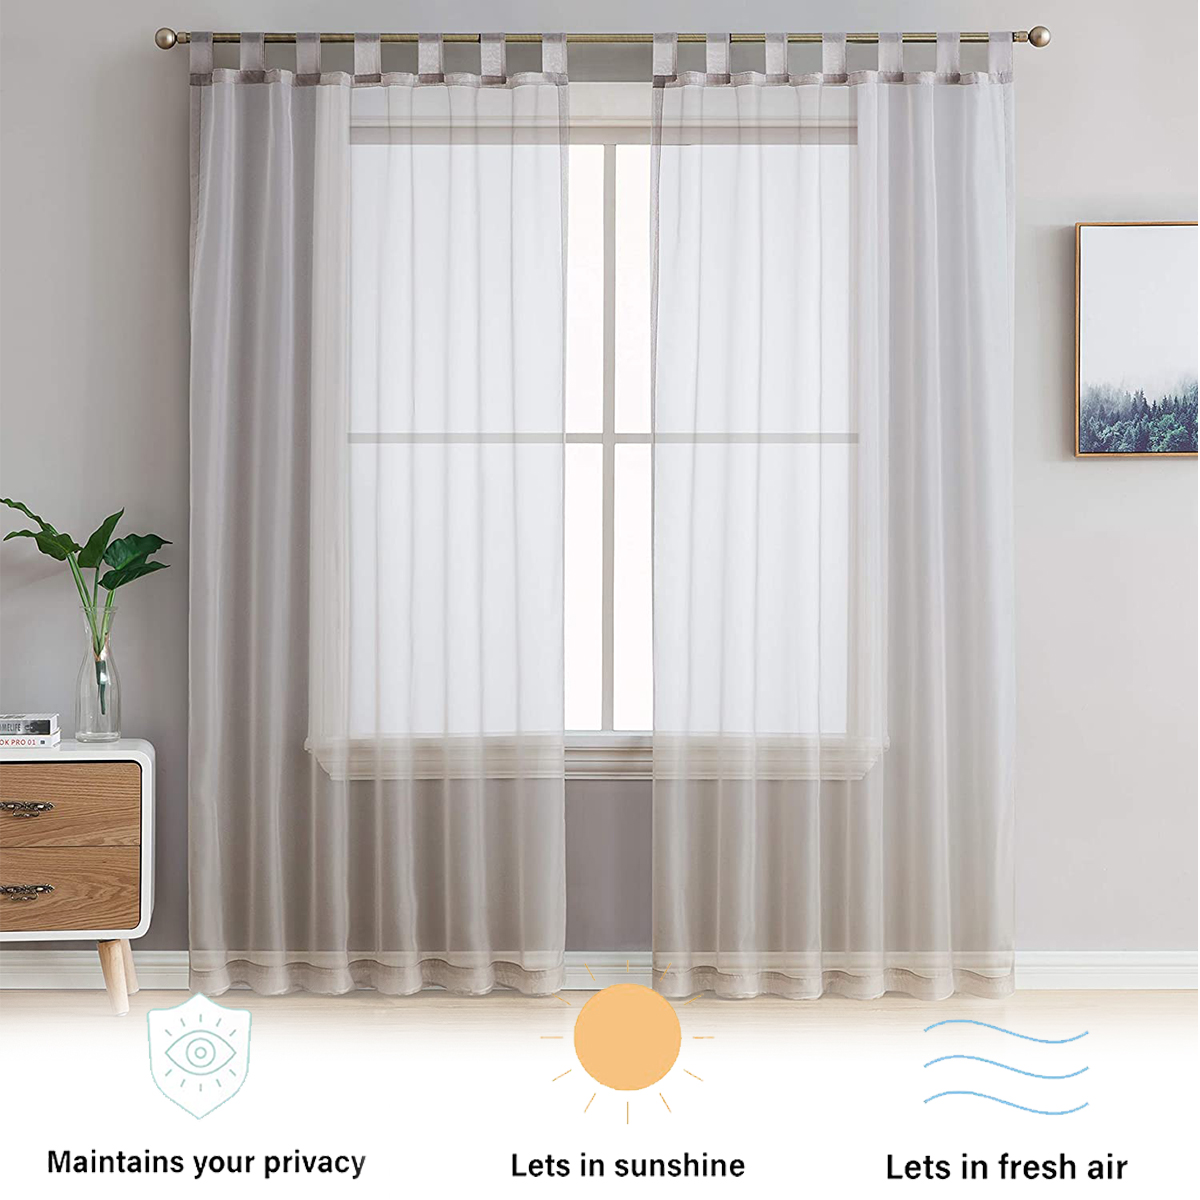 12PCS-White-Voile-Curtain-Polyester-Breathable-Tulle-Sheer-Curtains-for-Kitchen-Living-Room-Bedroom-1922438-2